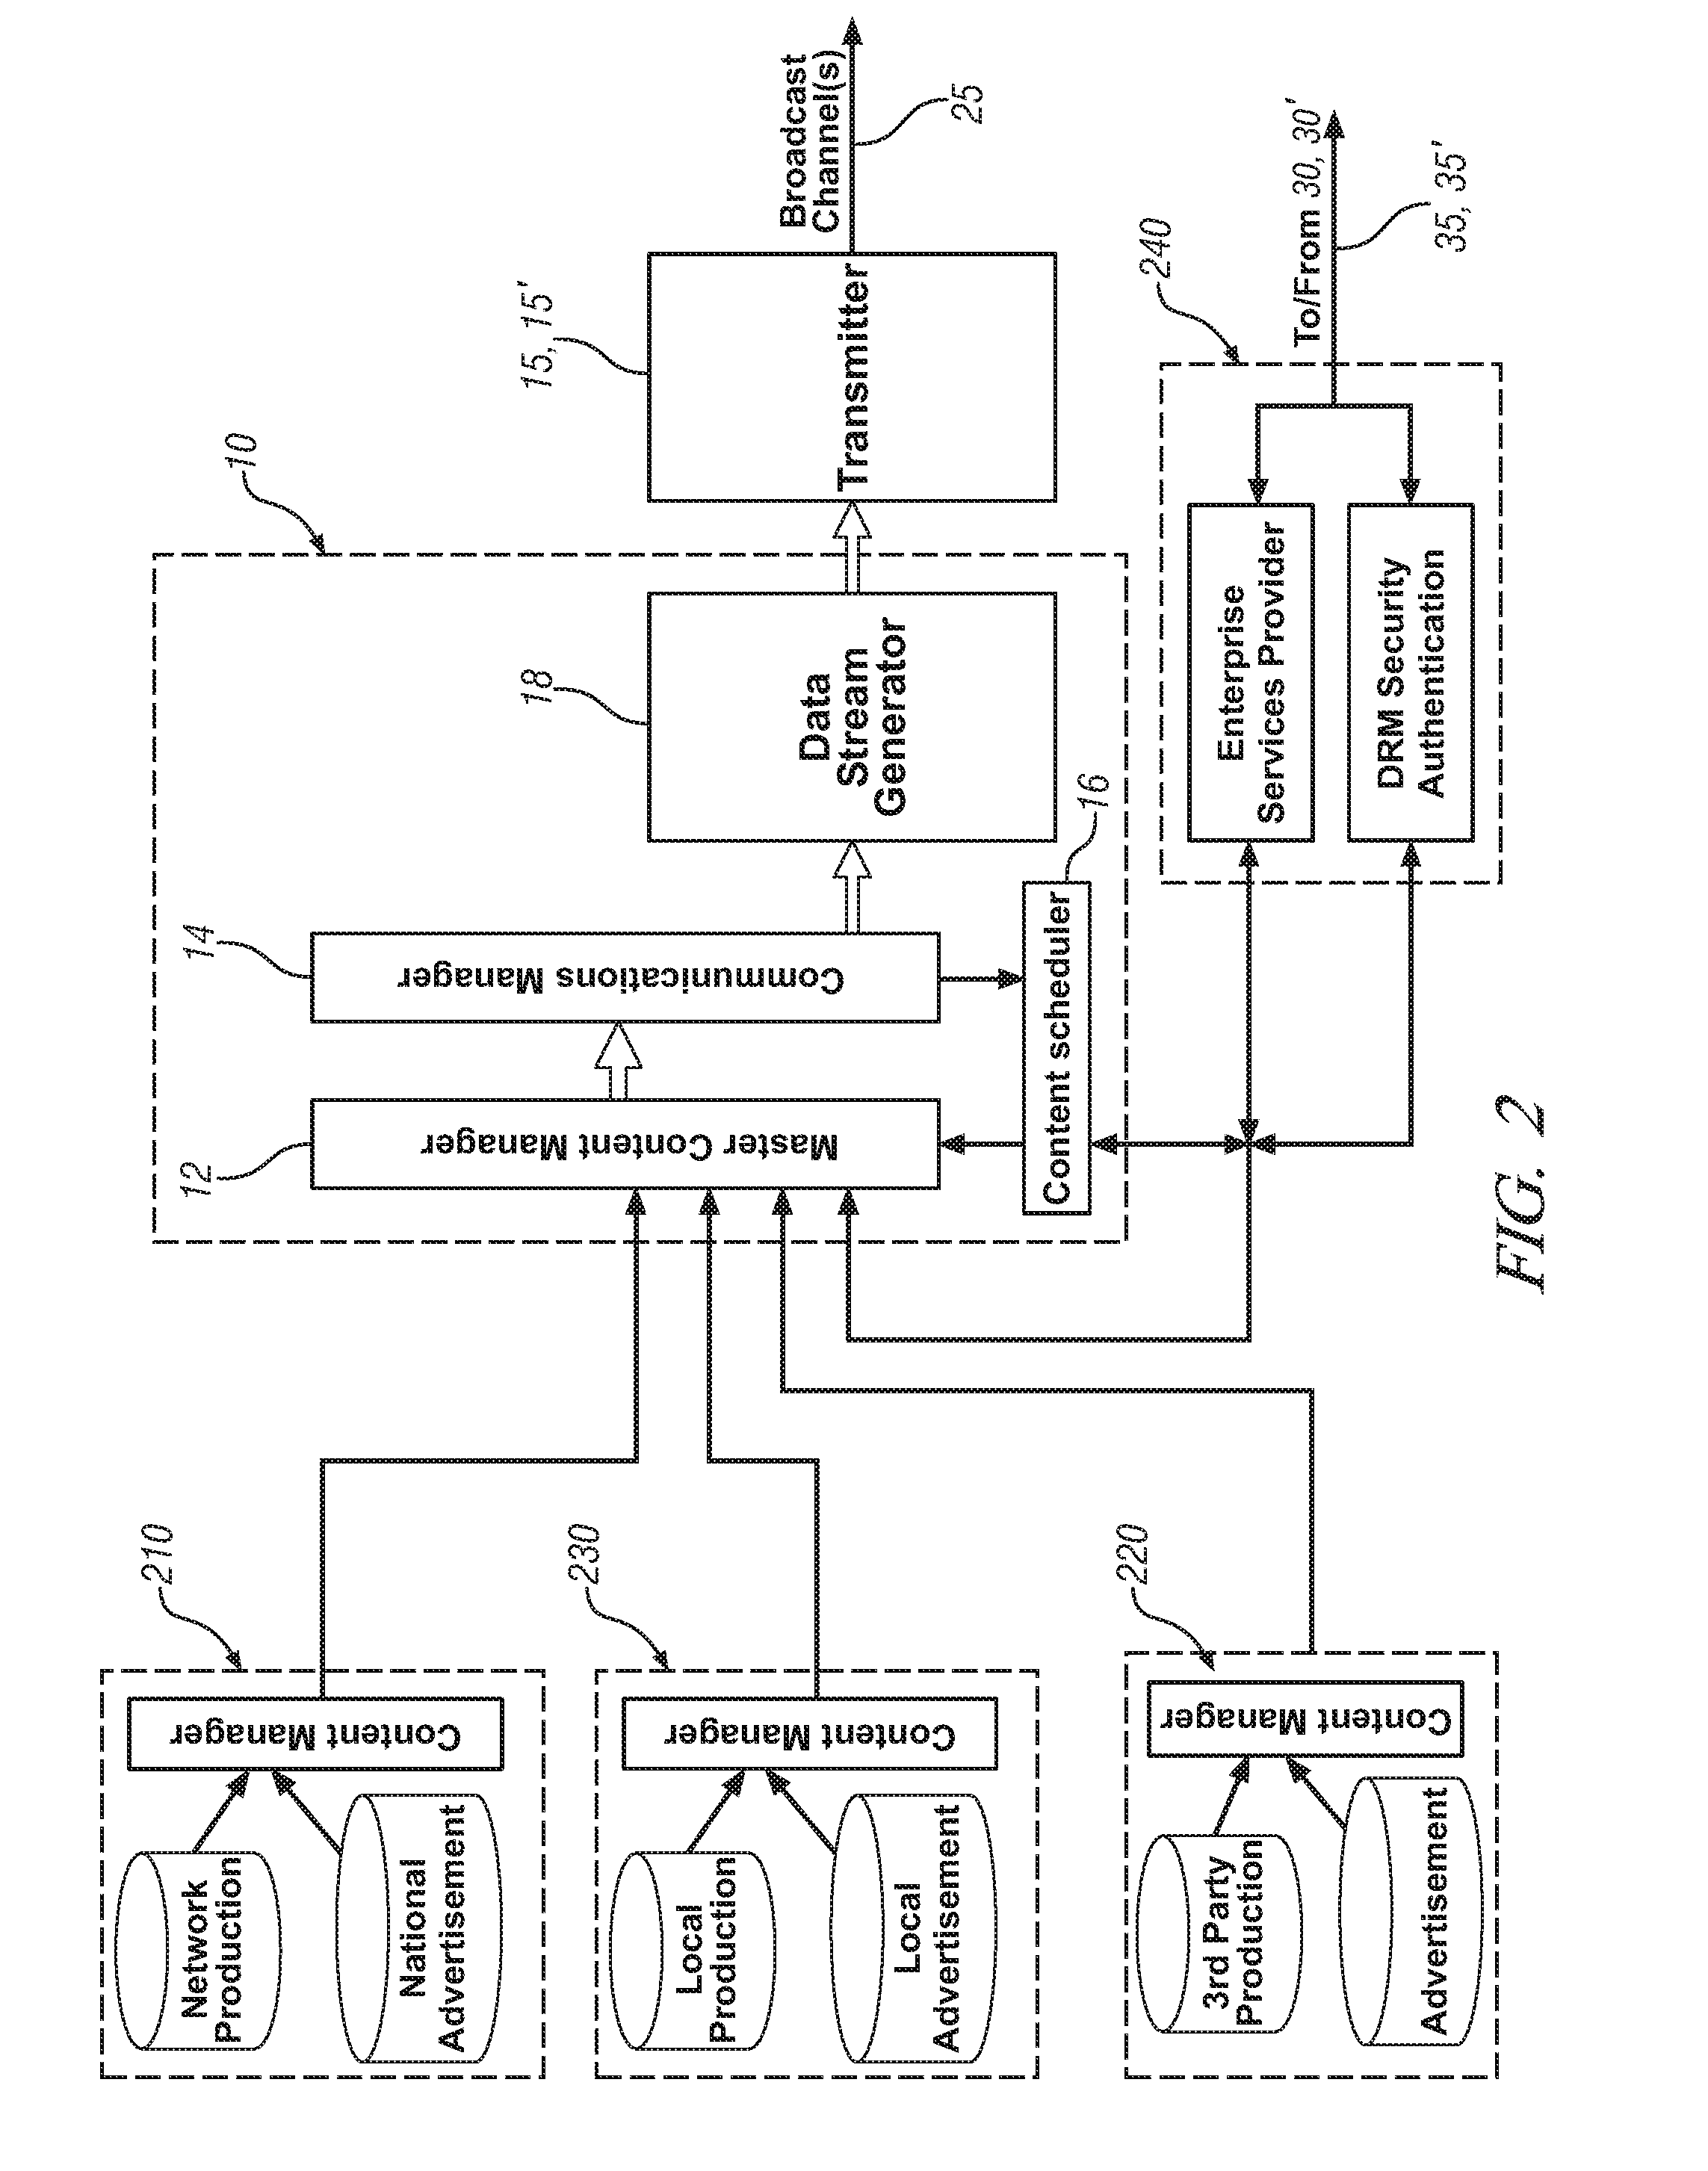 Method and apparatus for communicating a graphic image to a mobile platform via broadcast services